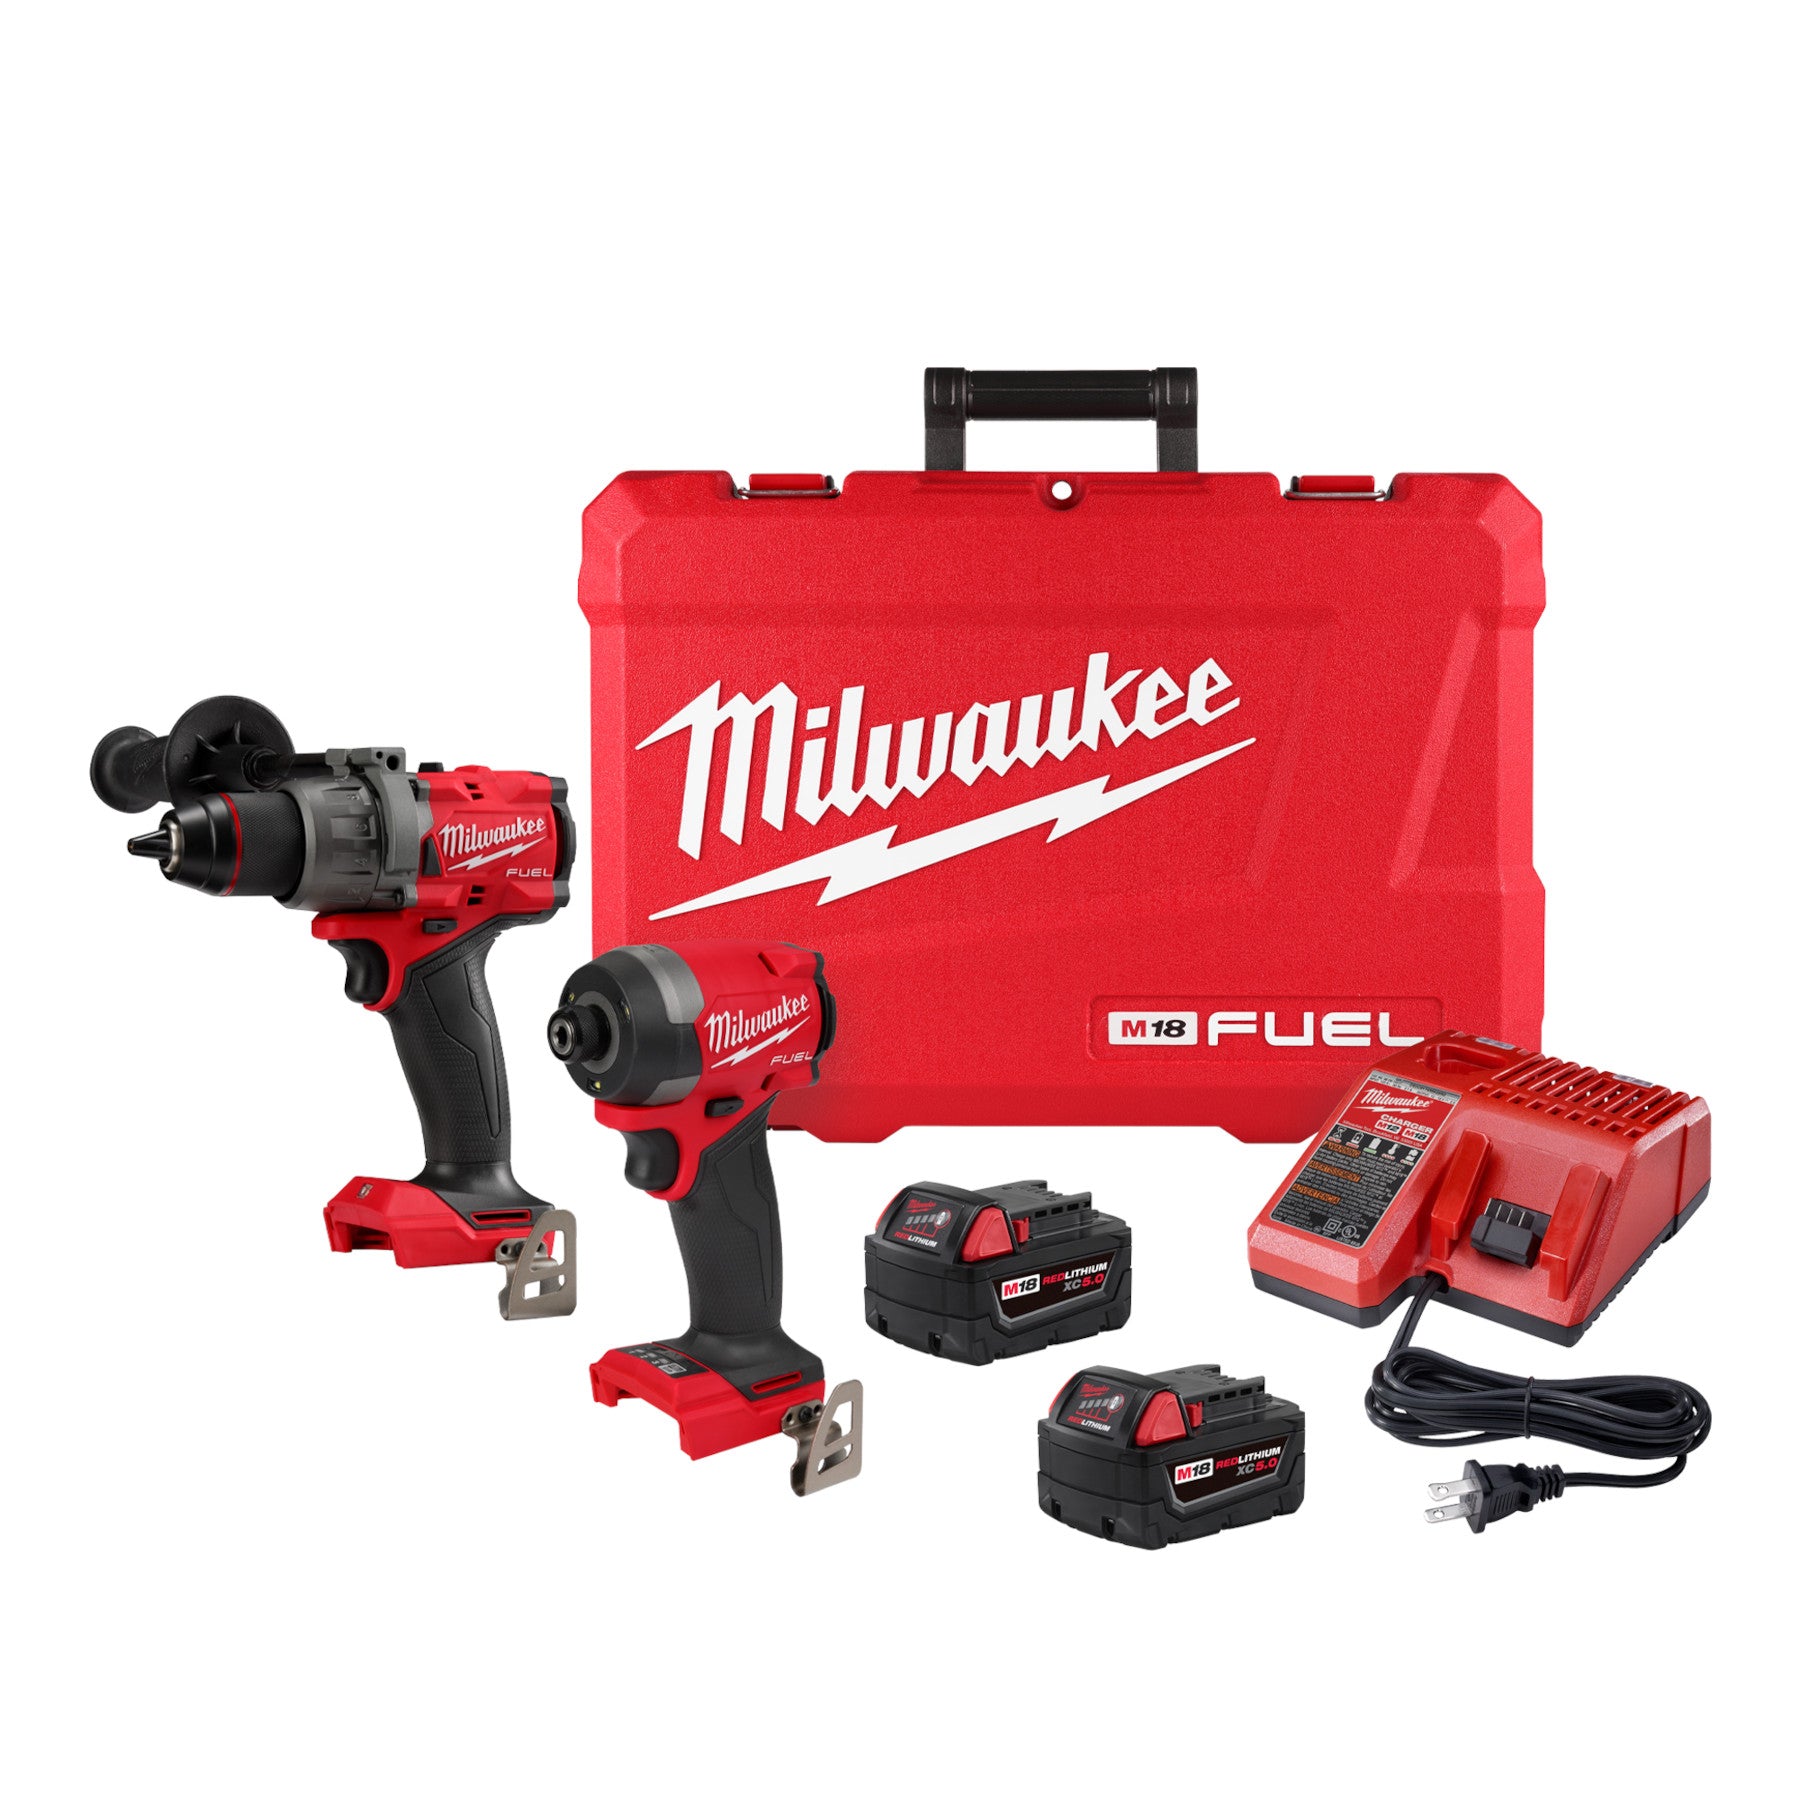 Milwaukee 3697-22 18V M18 Fuel Lithium-Ion Brushless Cordless 2-Tool Combo Kit with 1/2" Hammer Drill and 1/4" Hex Impact Drive